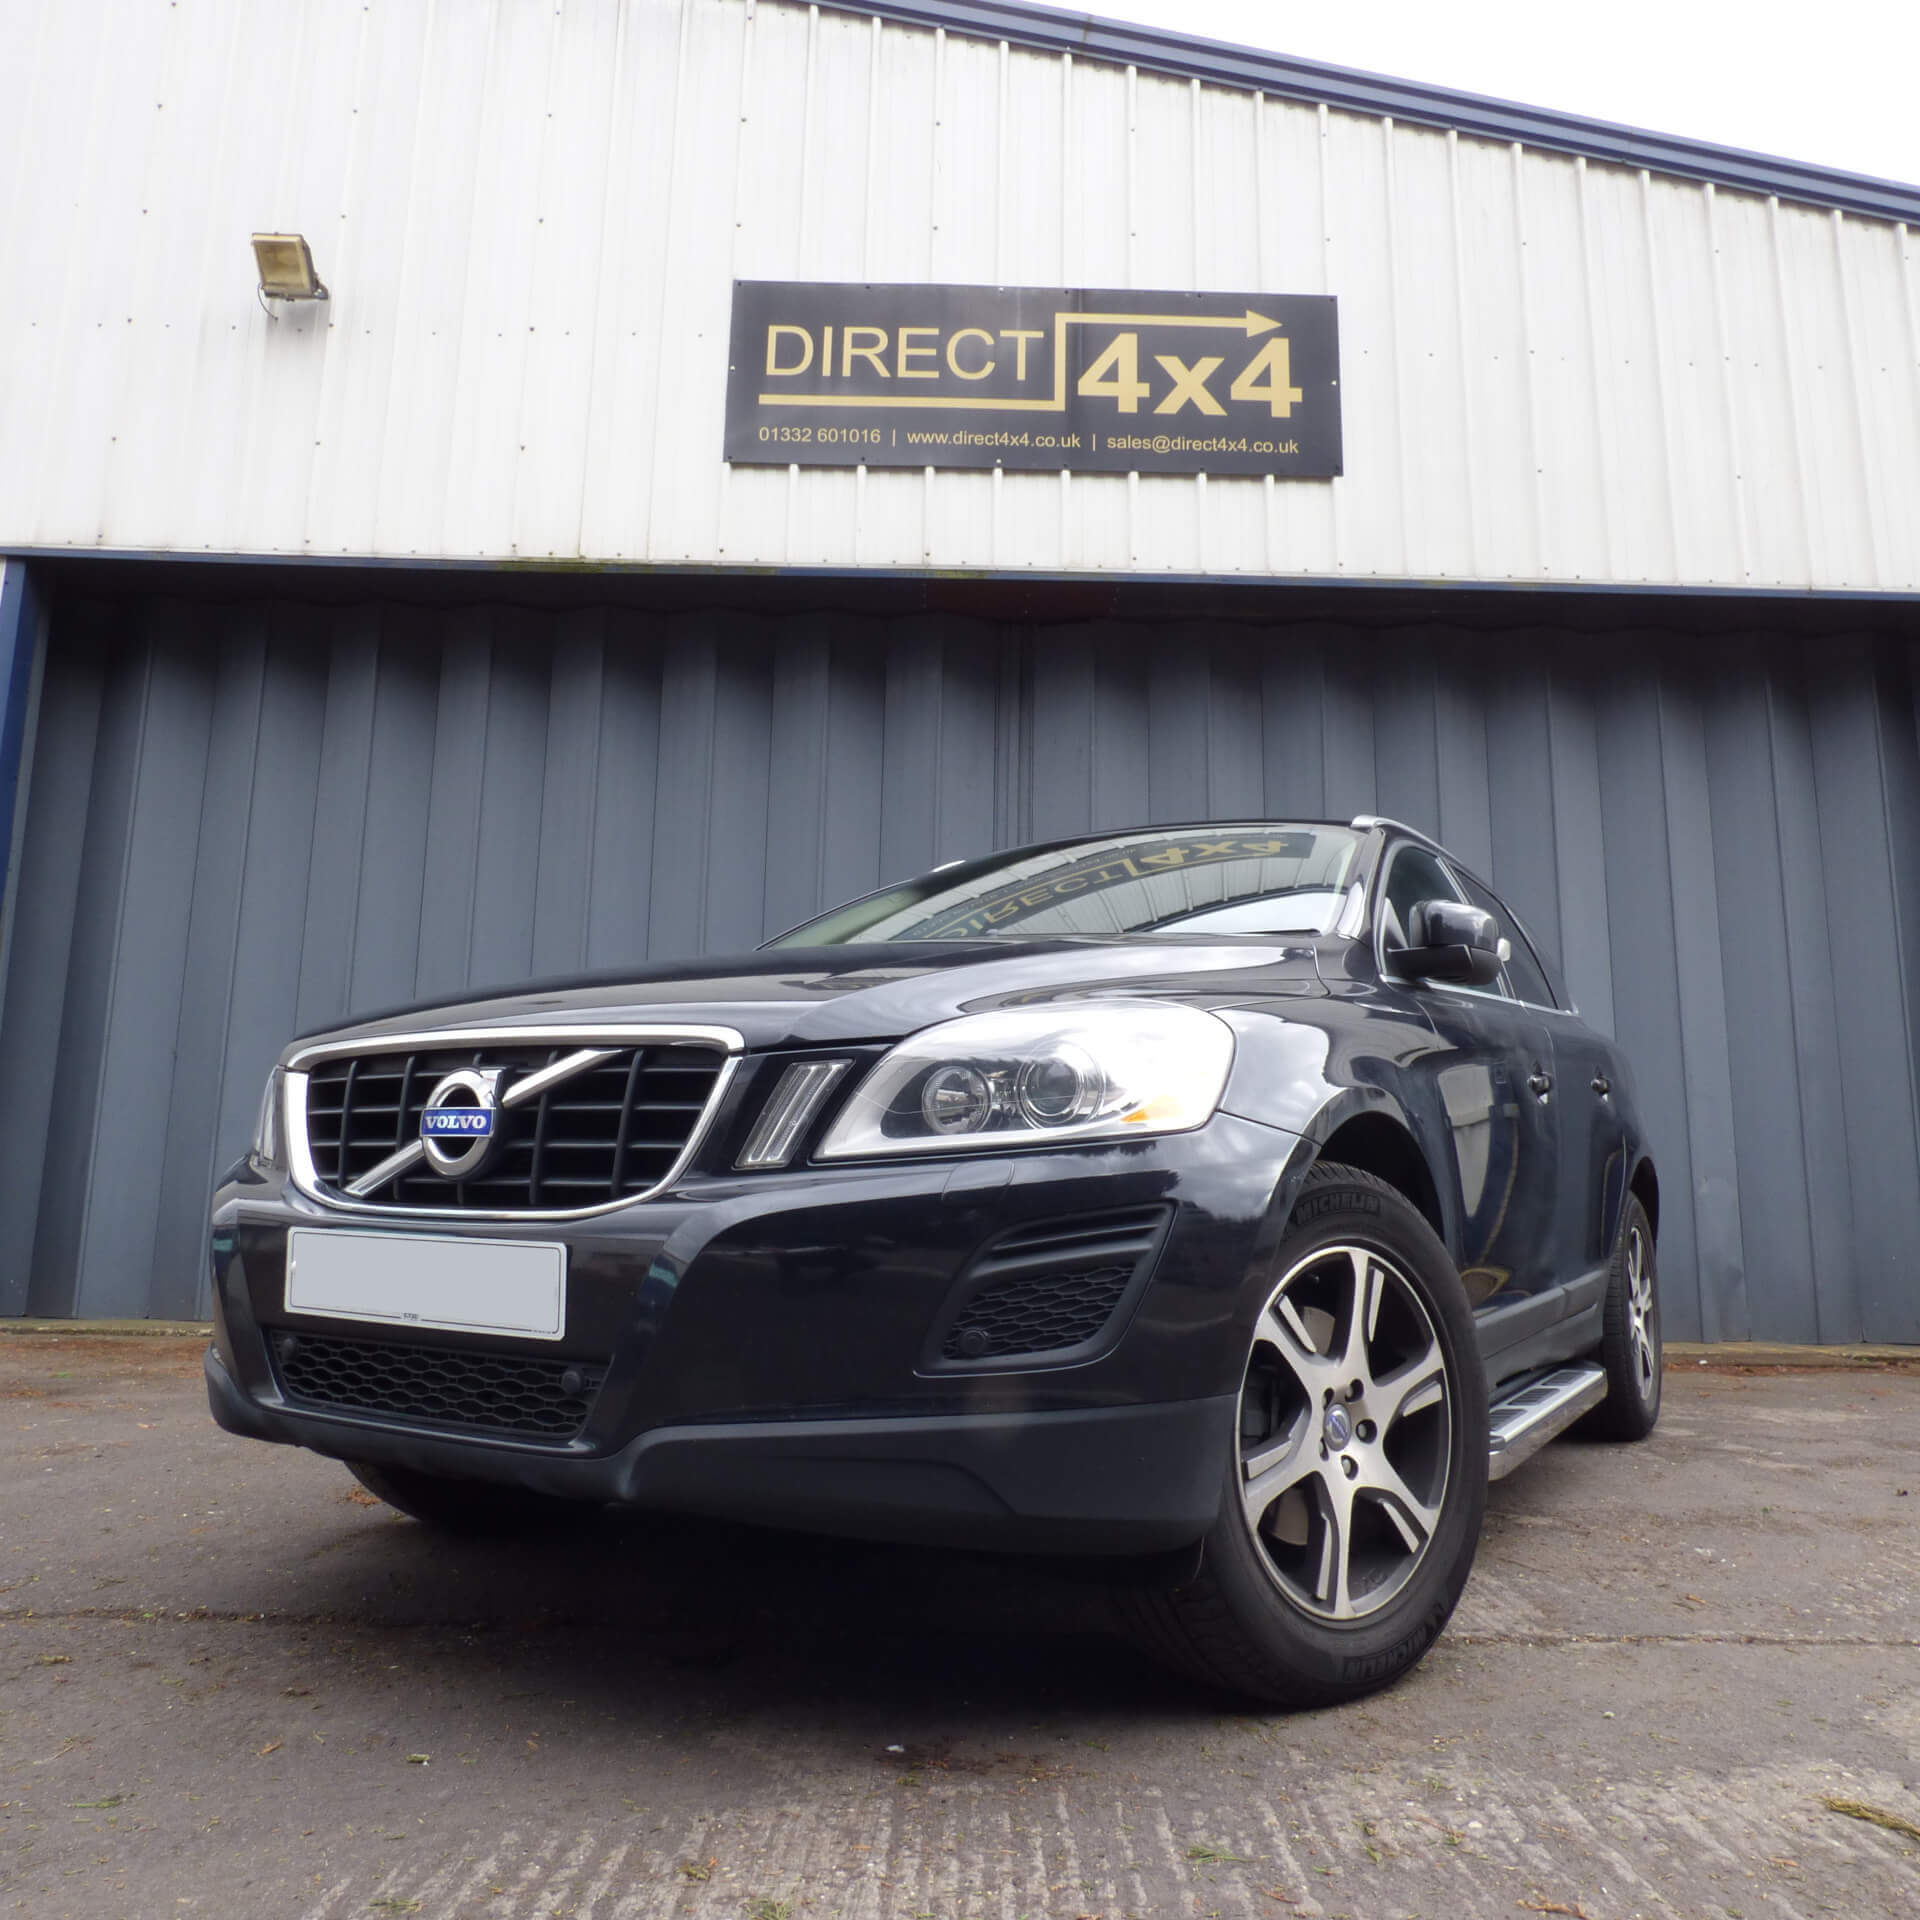 Direct4x4 accessories for Volvo XC60 vehicles with a photo of a black volvo xc60 parked under our direct4x4 sign outside our offices